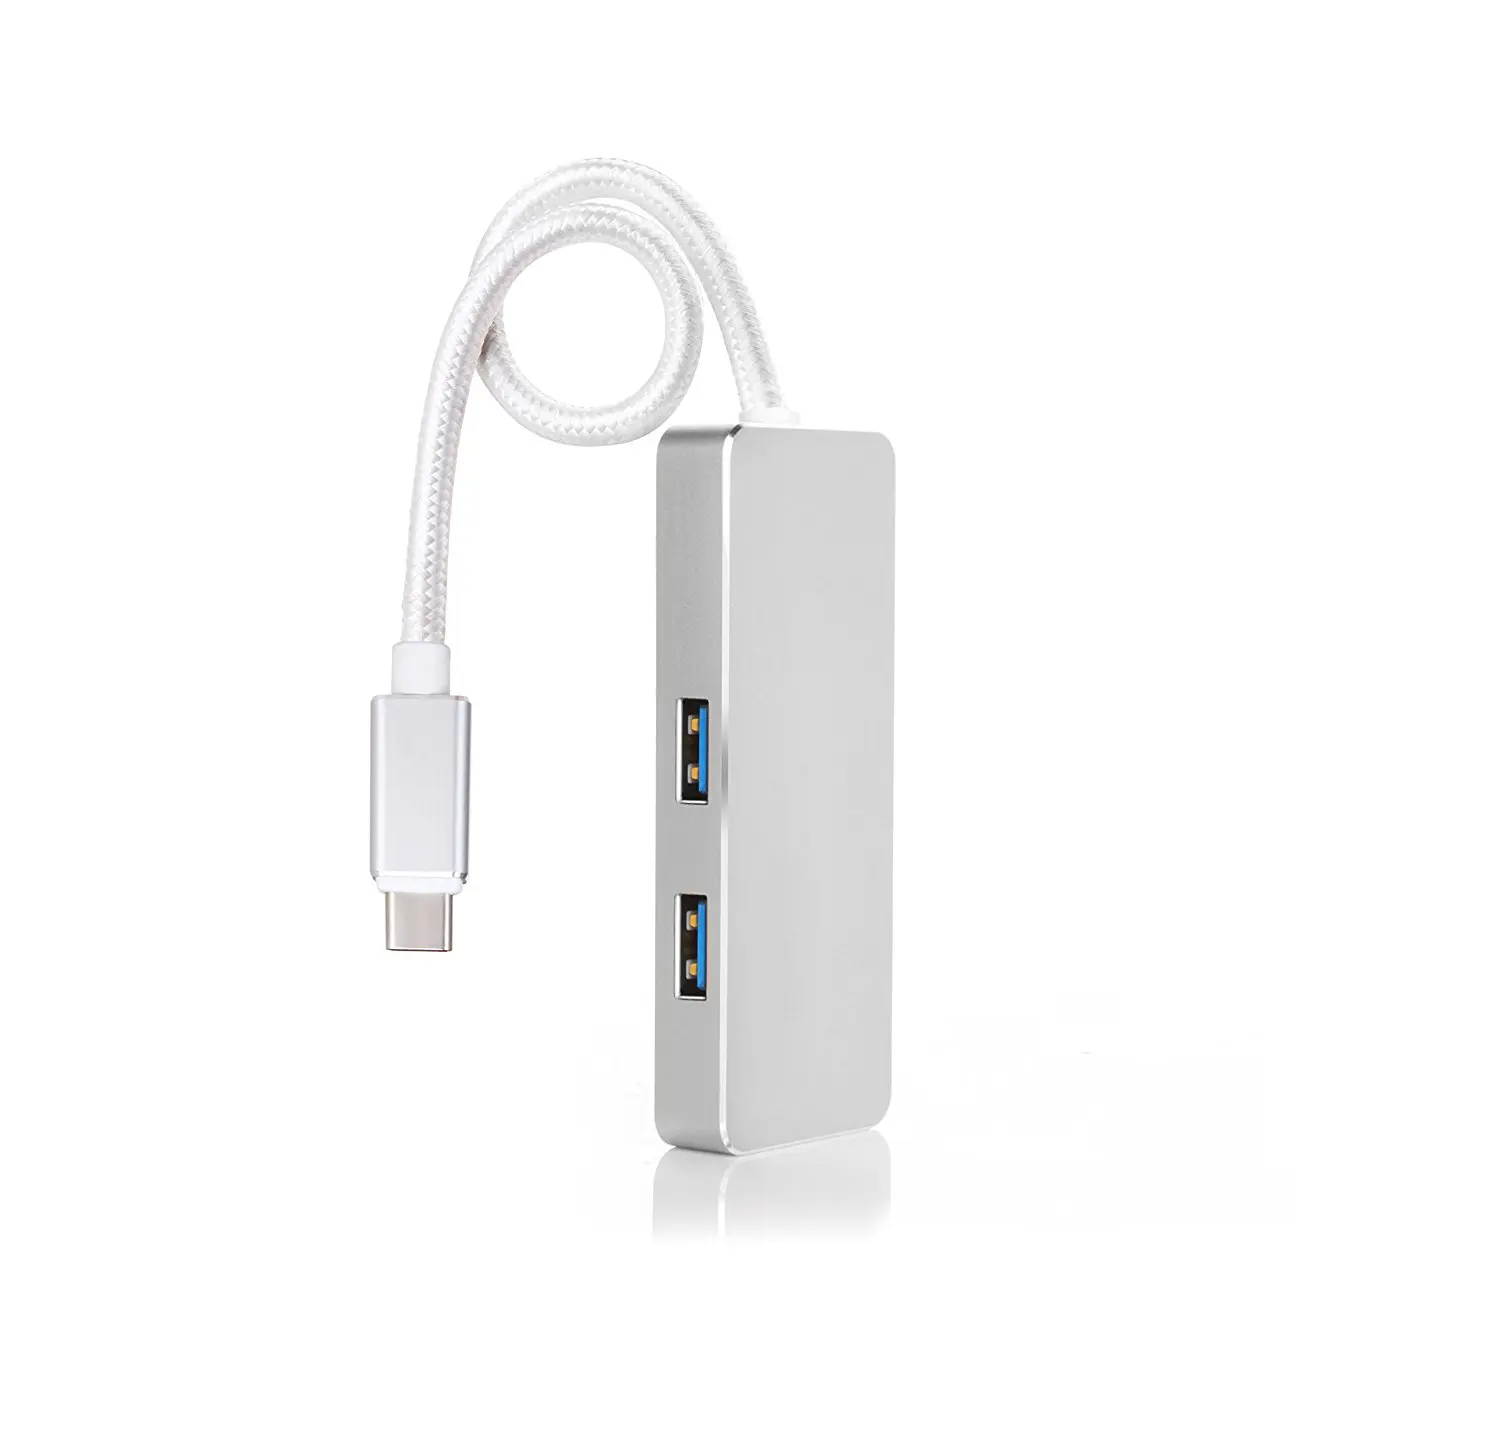 macbook 2015 charger price